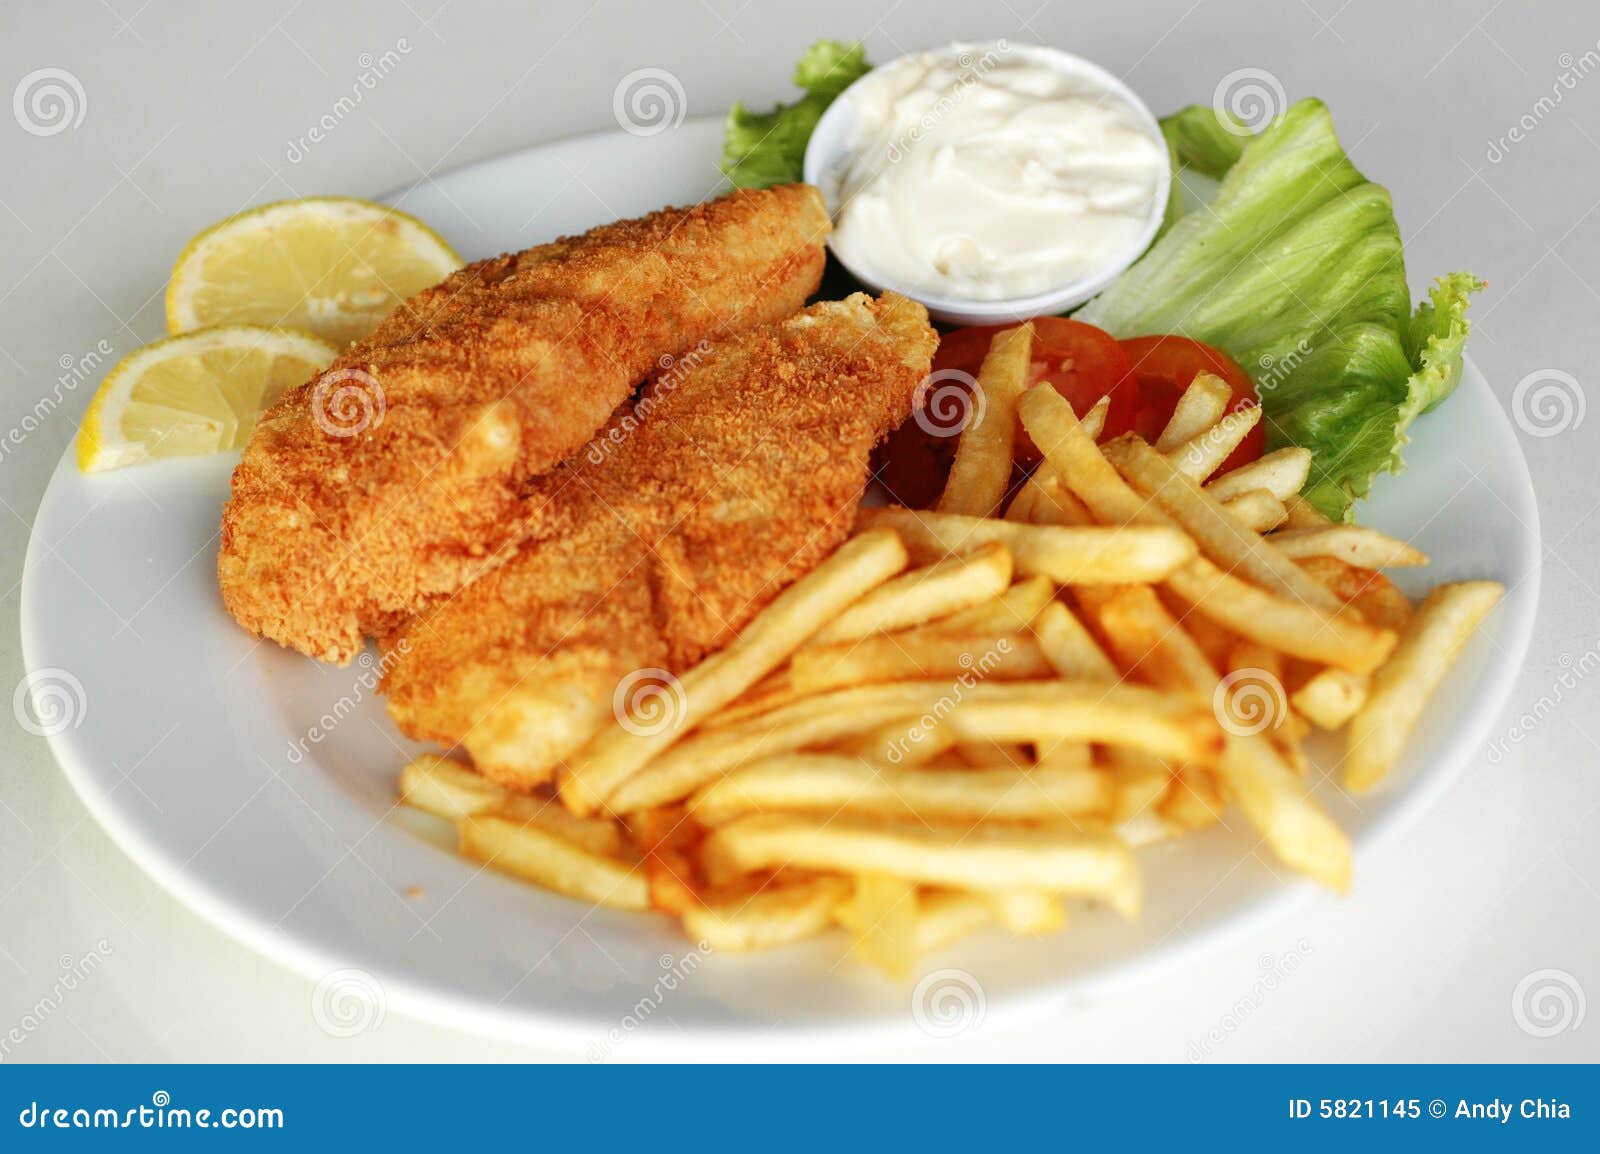 free clipart fish and chips - photo #38